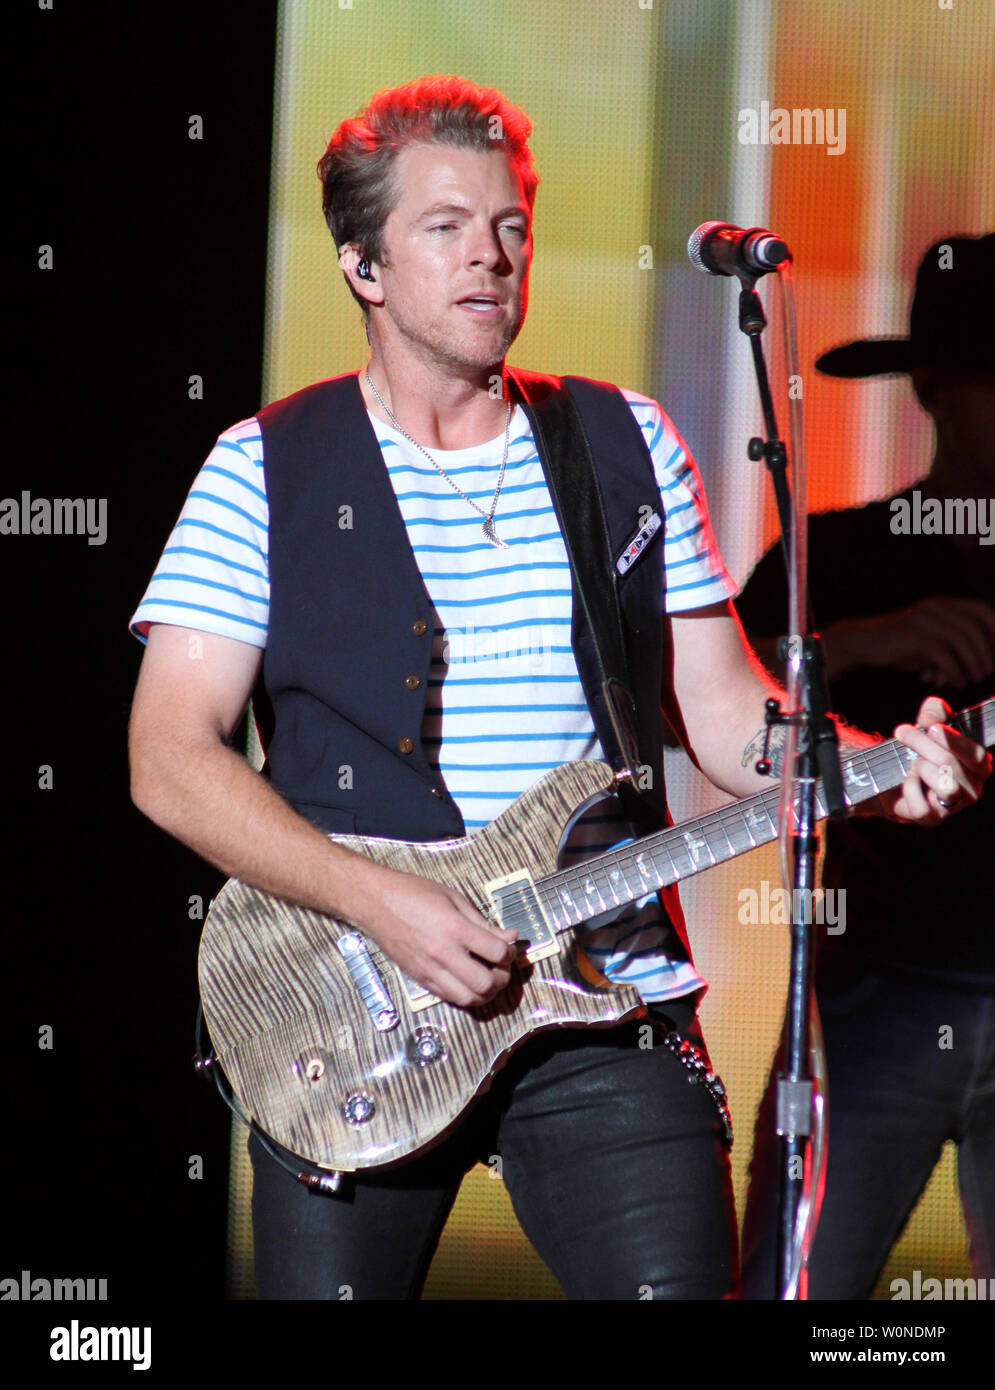 Joe Don Rooney with Rascal Flatts performs in concert at the Cruzan Amphitheatre in West Palm Beach, Florida on September 13, 2014. UPI/Michael Bush Stock Photo